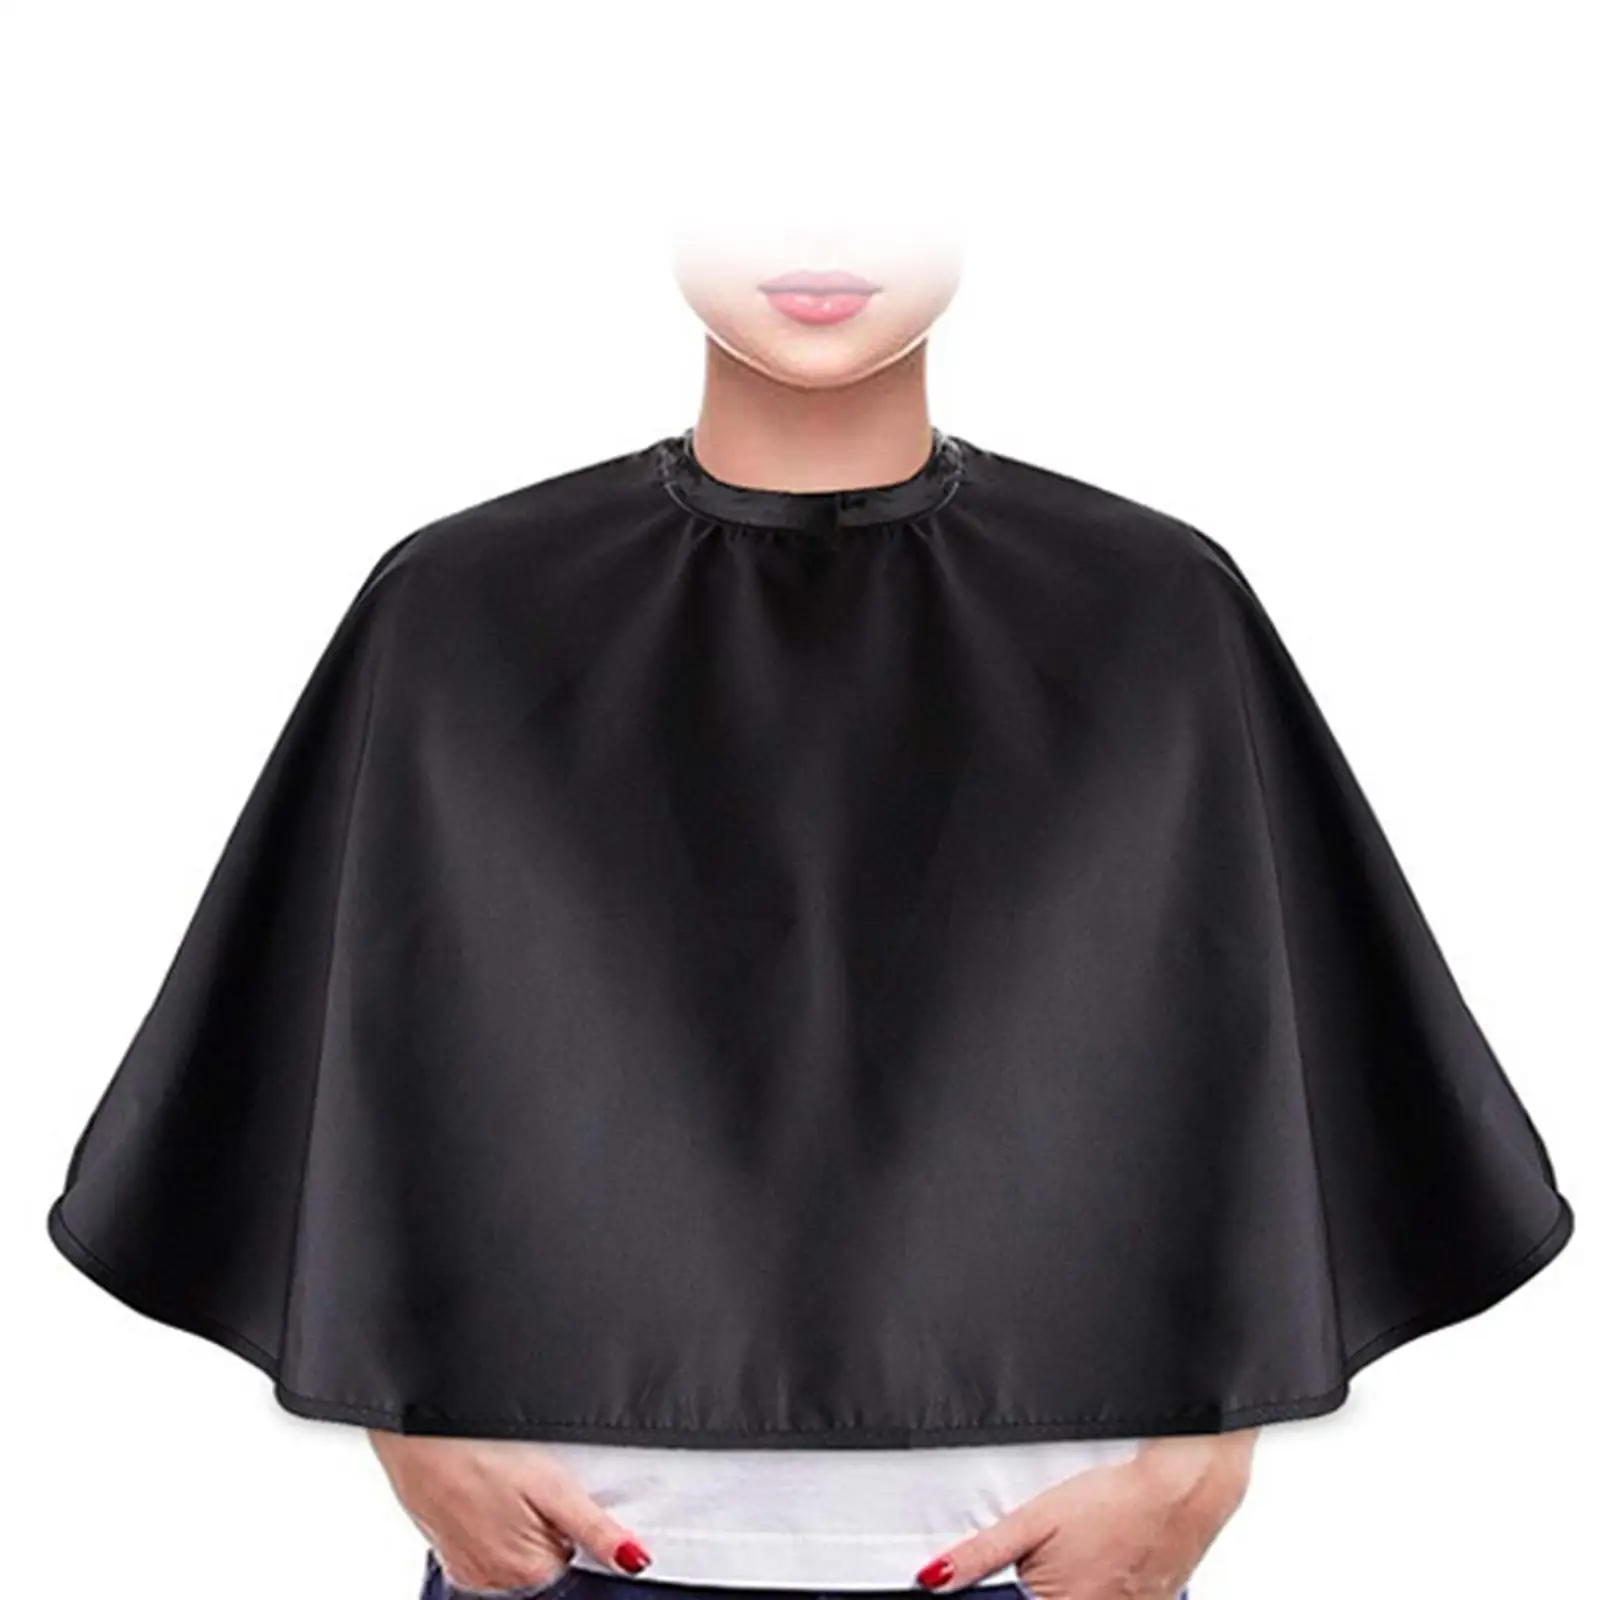 Hair Cutting Cape Hairdressing Professional Hair Dyeing Shawl Dyed Hair Non Slip for Neck Guard Barbershop Protection Coloring